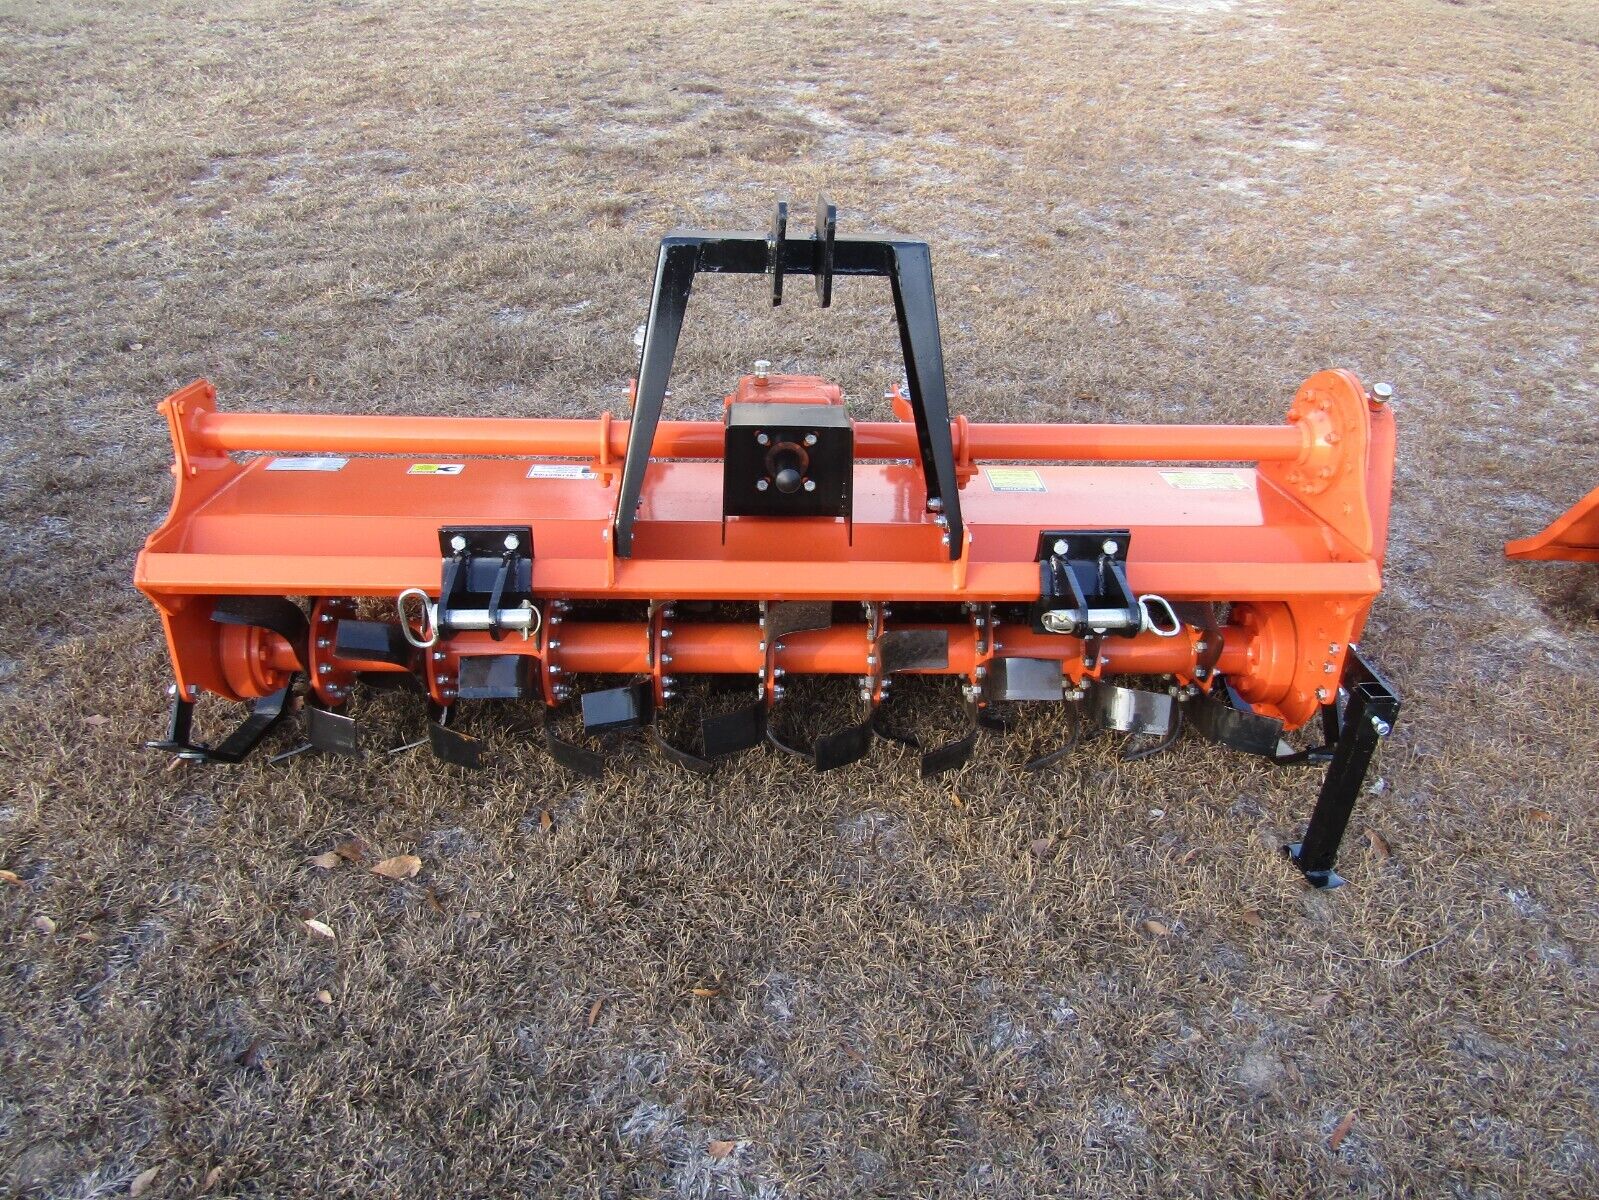 72" Rotary Tiller, HD Gear drive (no chain), slip clutch pto, all welded A-Frame